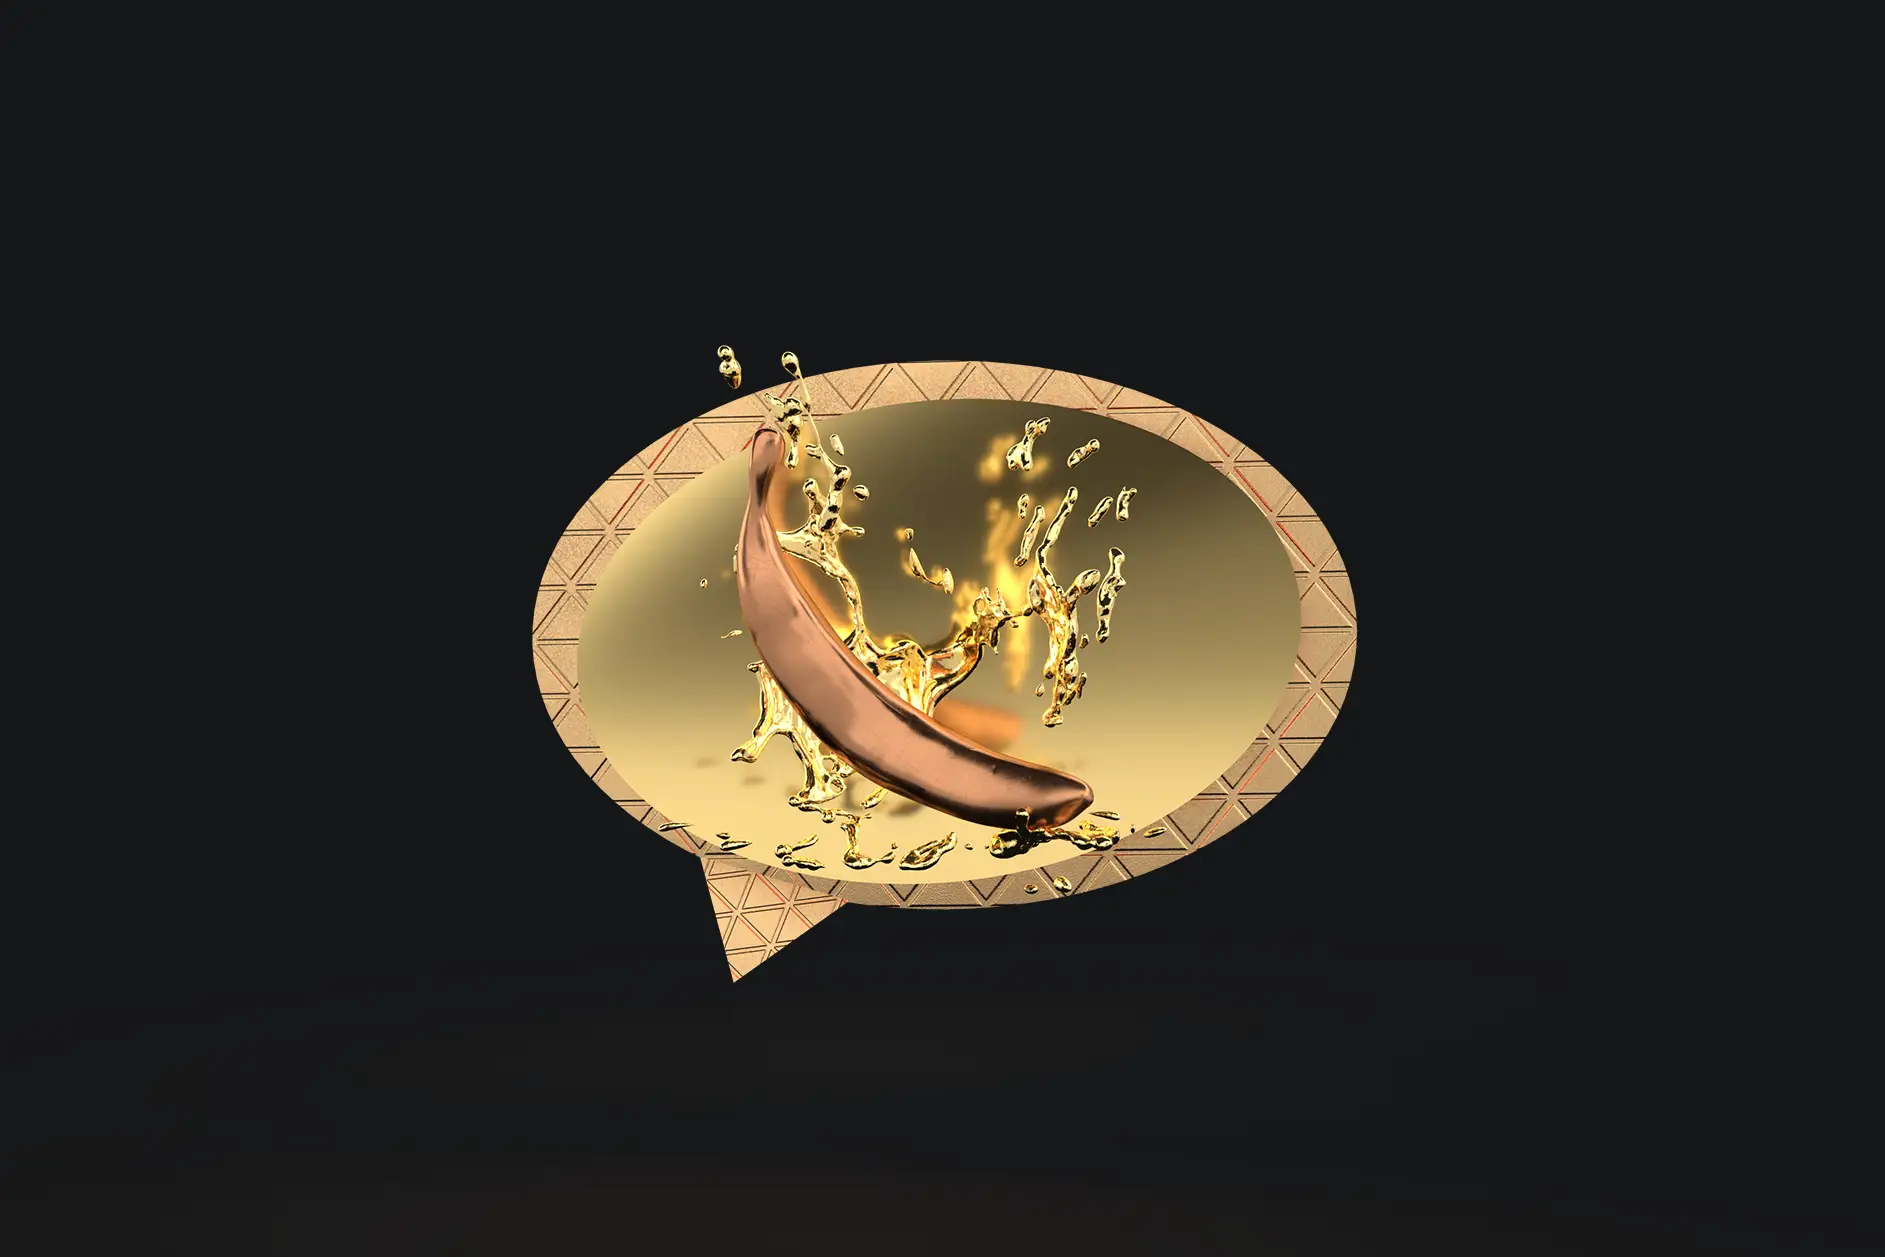 A stylized golden messenger icon with a spashing banana instead of a phone.